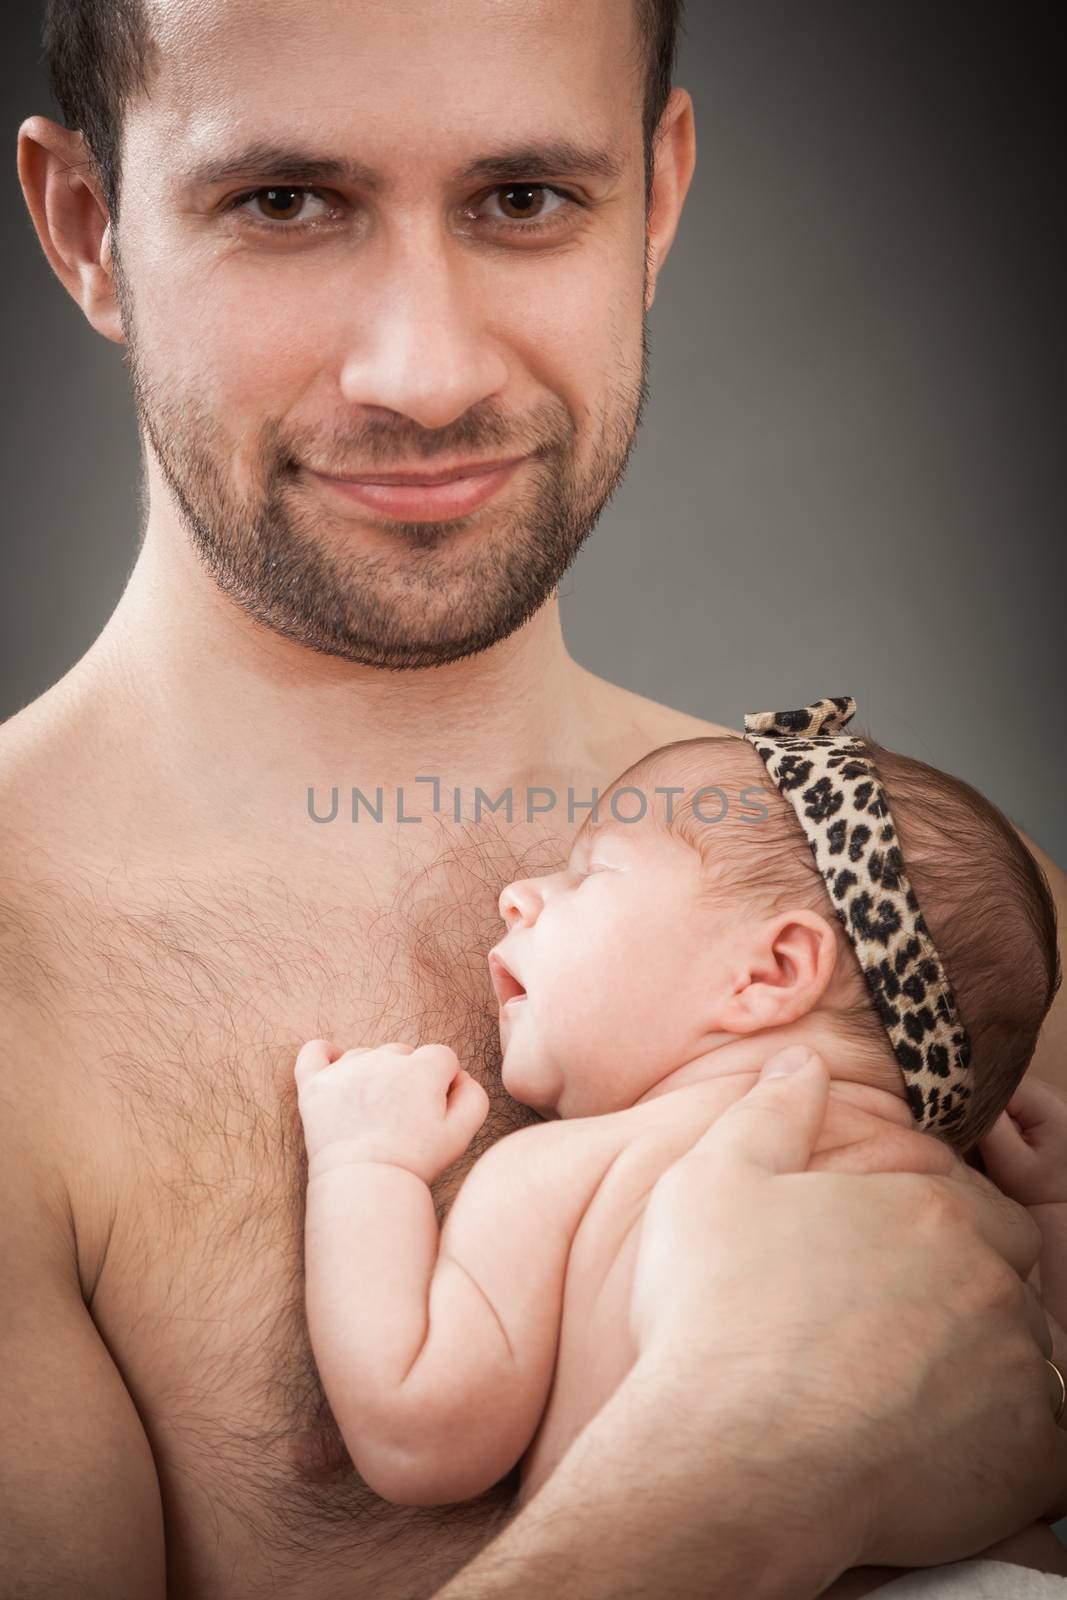 the father holds on hands of the newborn child